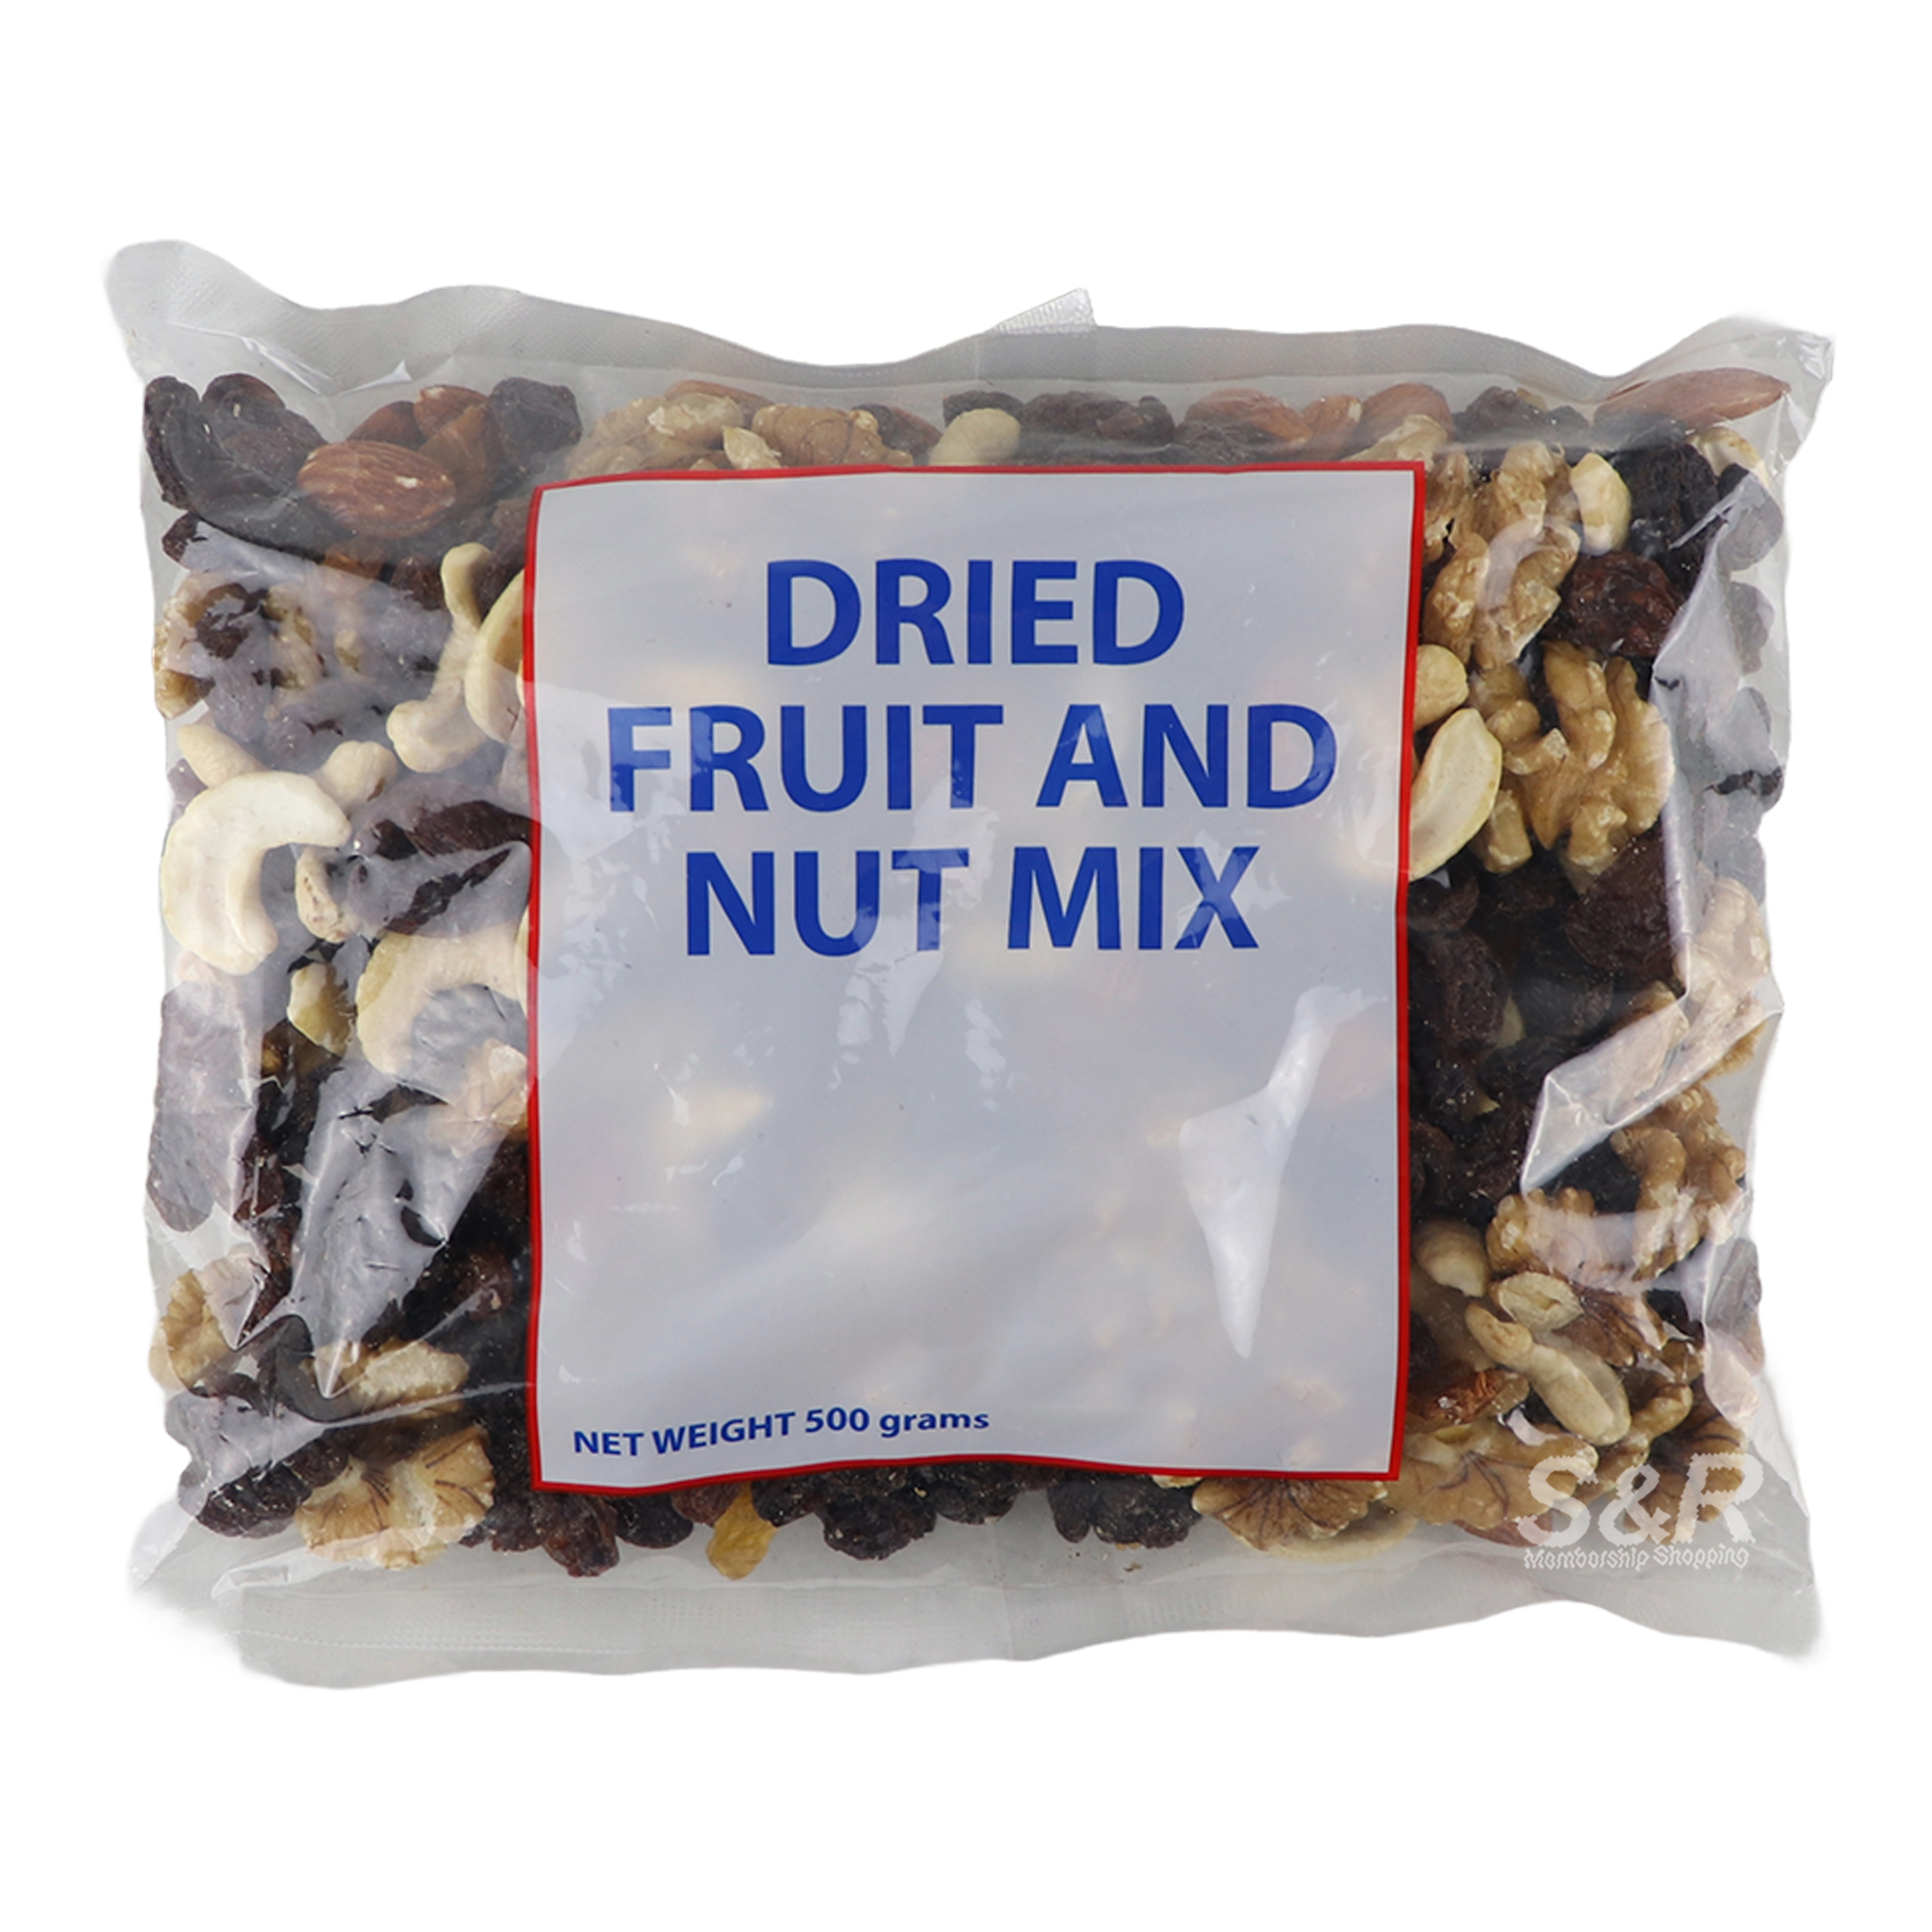 S&R Dried Fruit and Nut Mix 500g